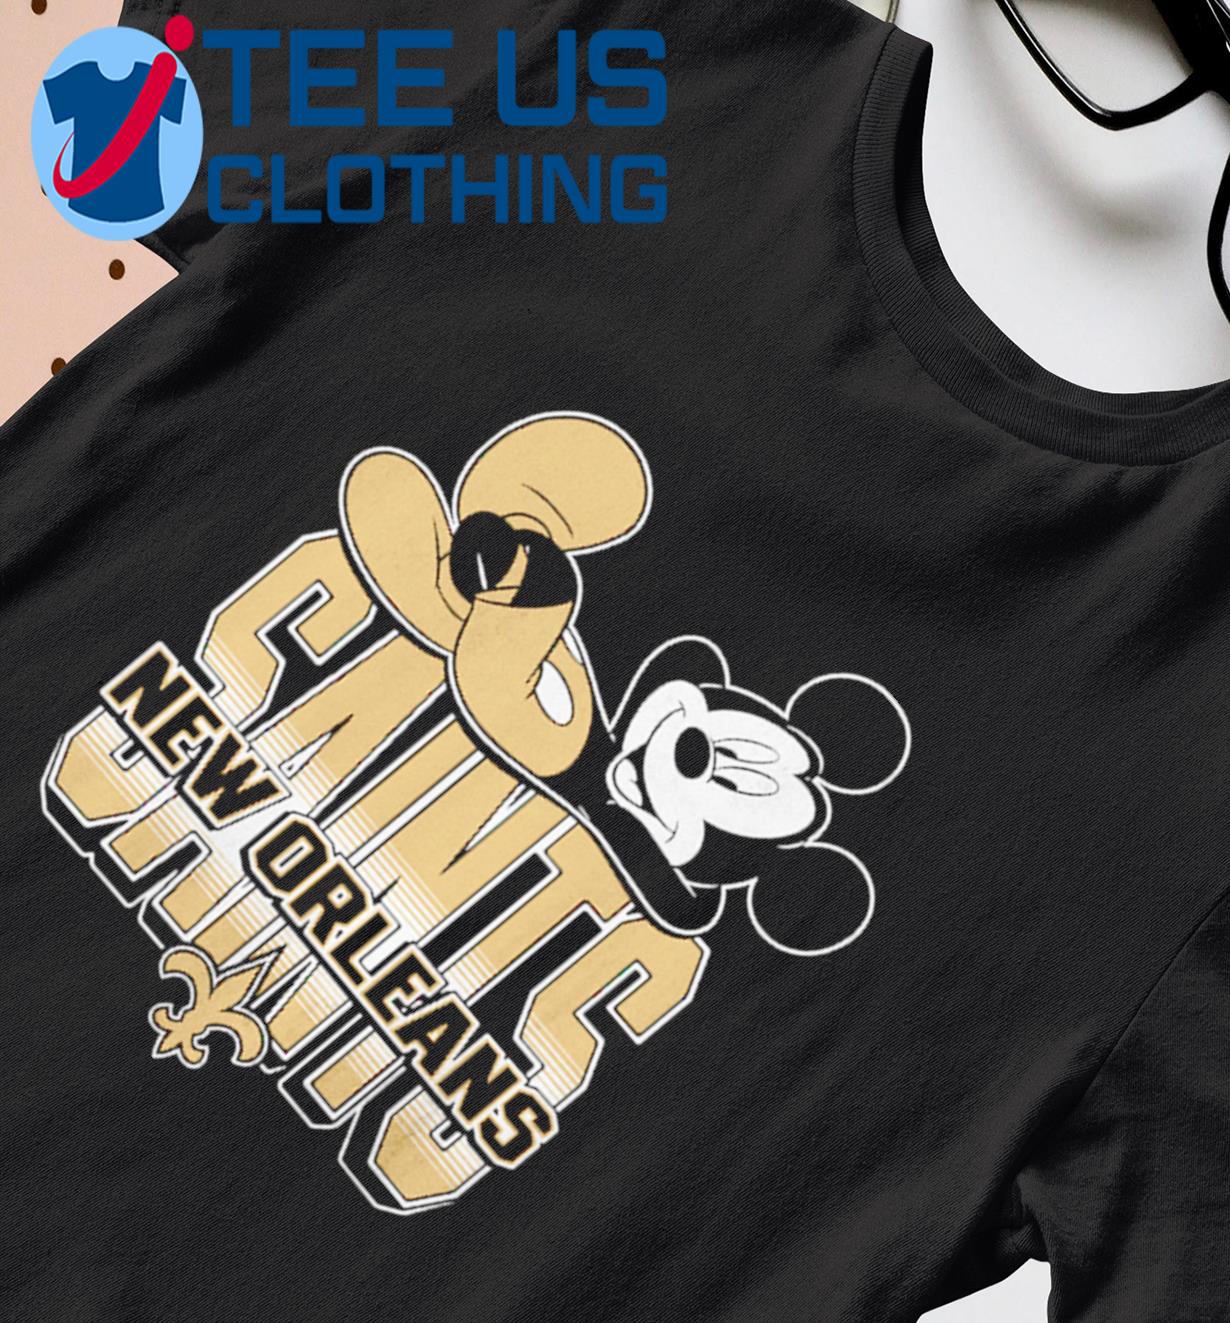 mickey mouse new orleans saints